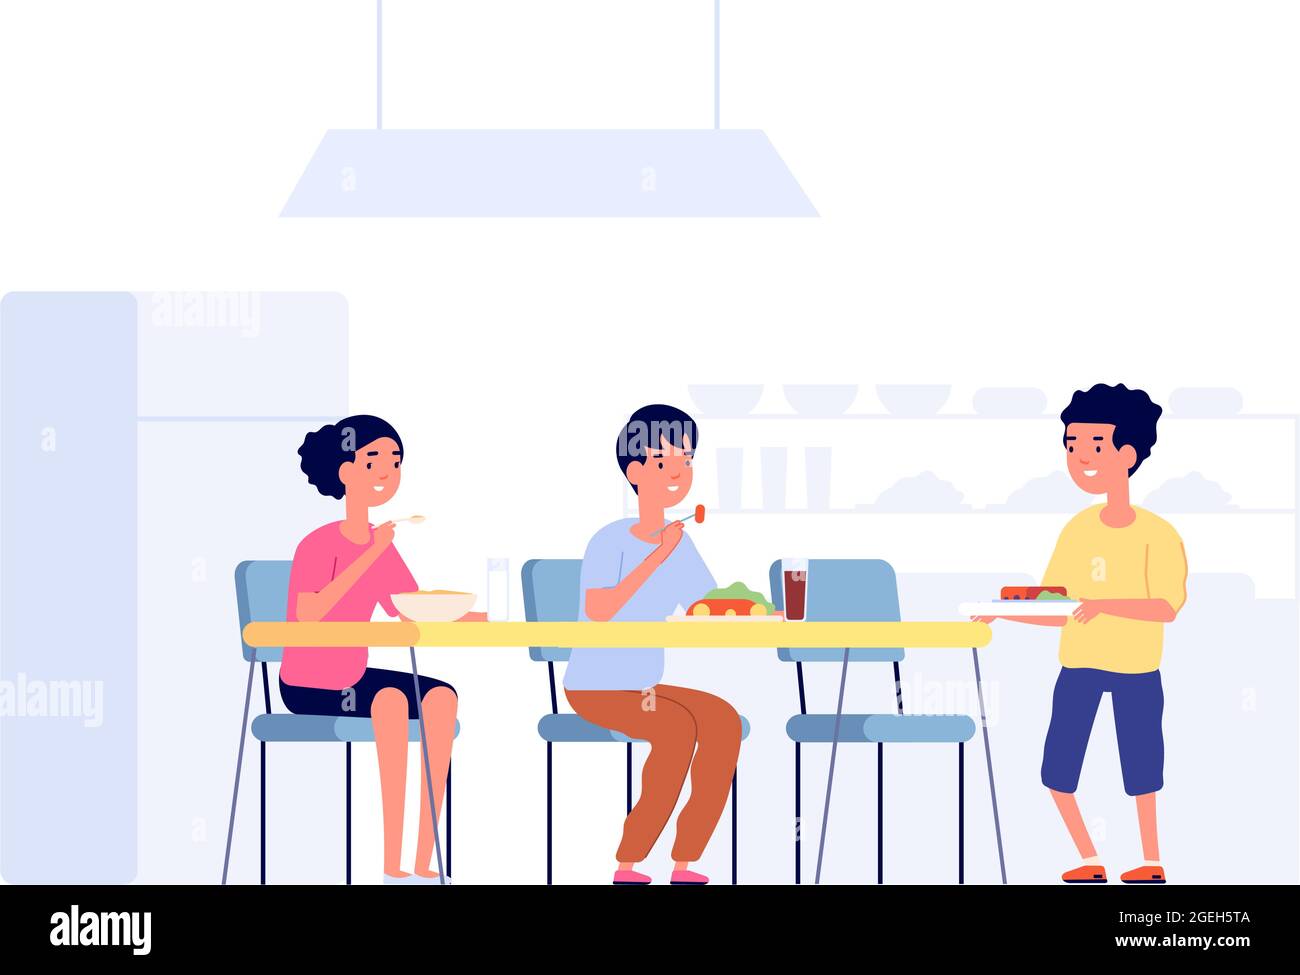 https://c8.alamy.com/comp/2GEH5TA/children-on-lunch-school-kids-eating-cafeteria-room-table-flat-students-in-canteen-meeting-new-friend-dining-time-vector-illustration-2GEH5TA.jpg